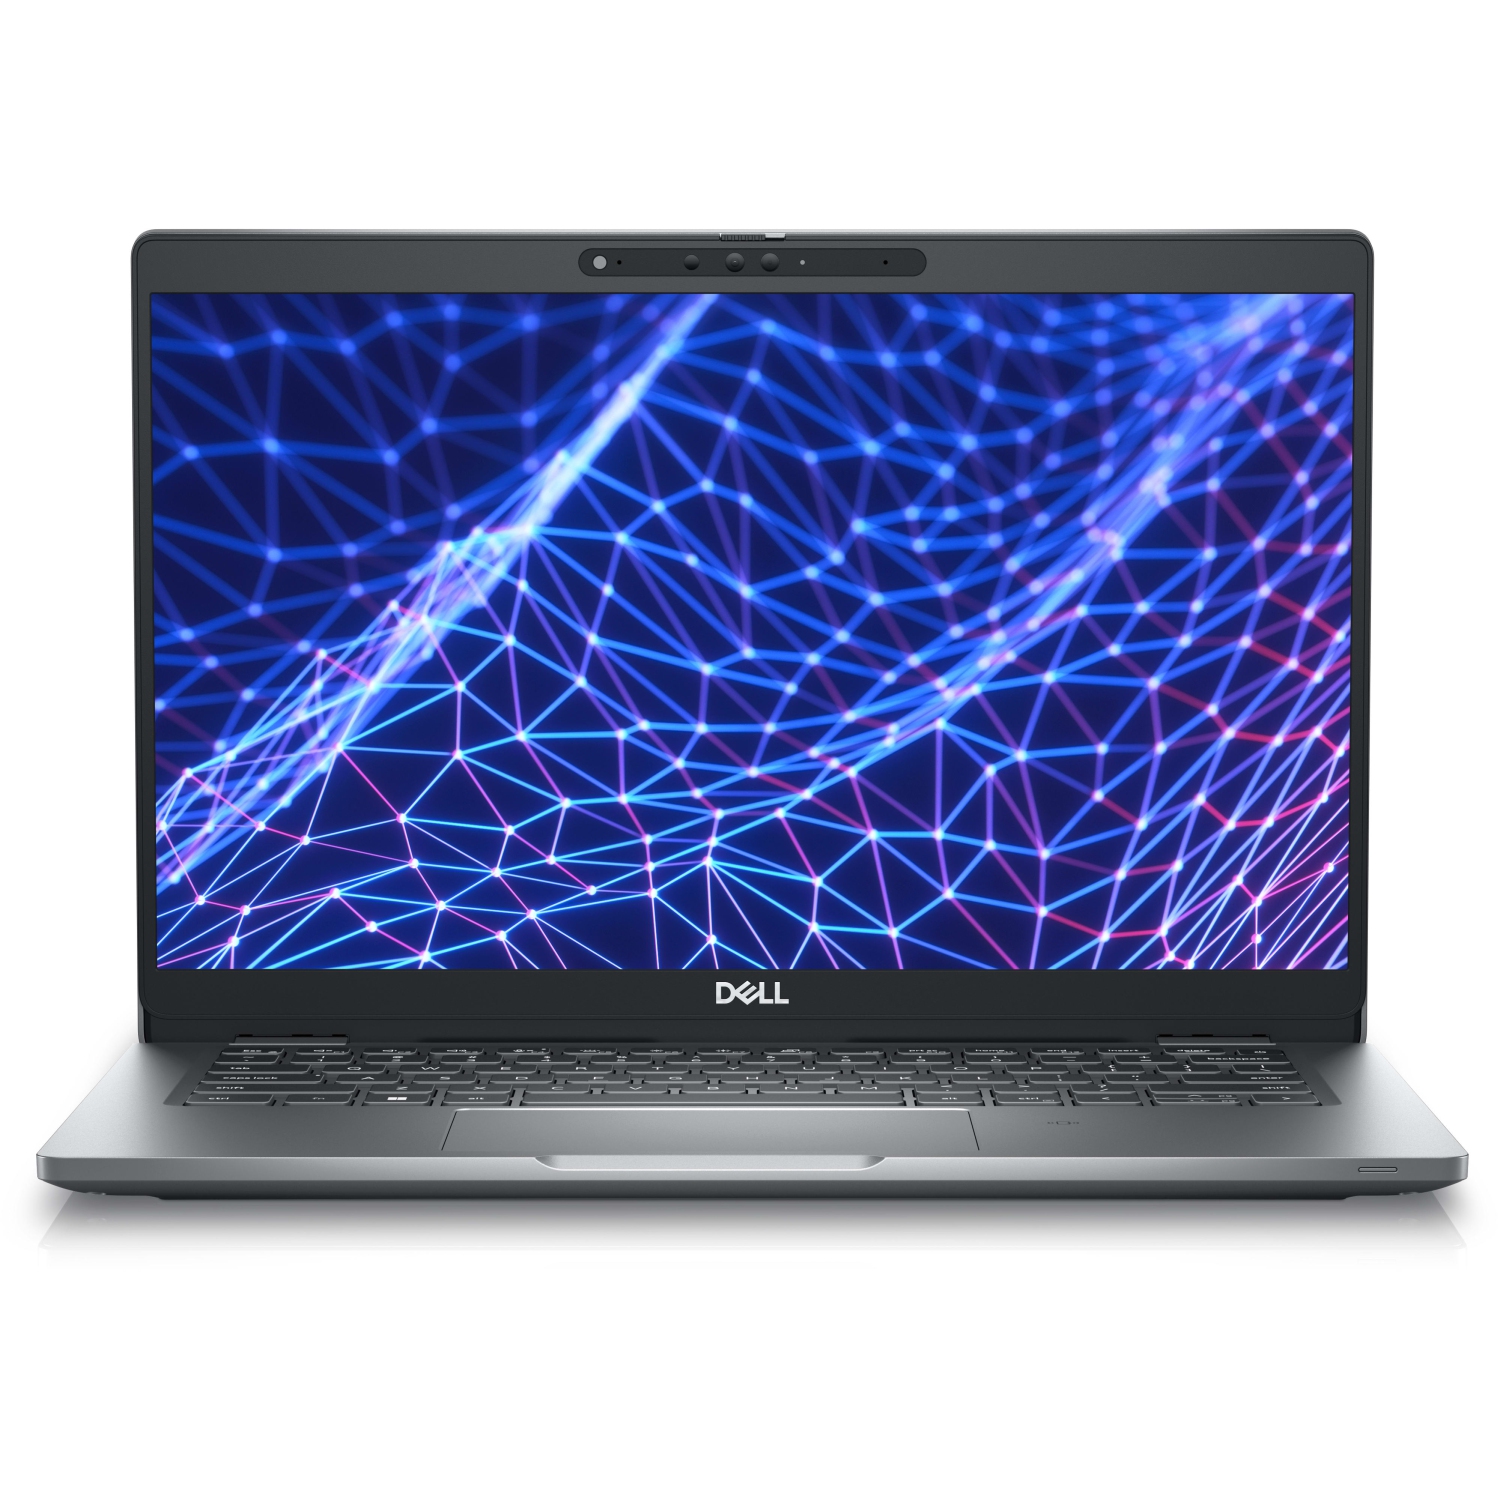 Dell Latitude 5000 5330 Laptop (2022) | 13.3" FHD | Core i5 - 256GB SSD - 8GB RAM | 10 Cores @ 4.4 GHz - 12th Gen CPU Certified Refurbished